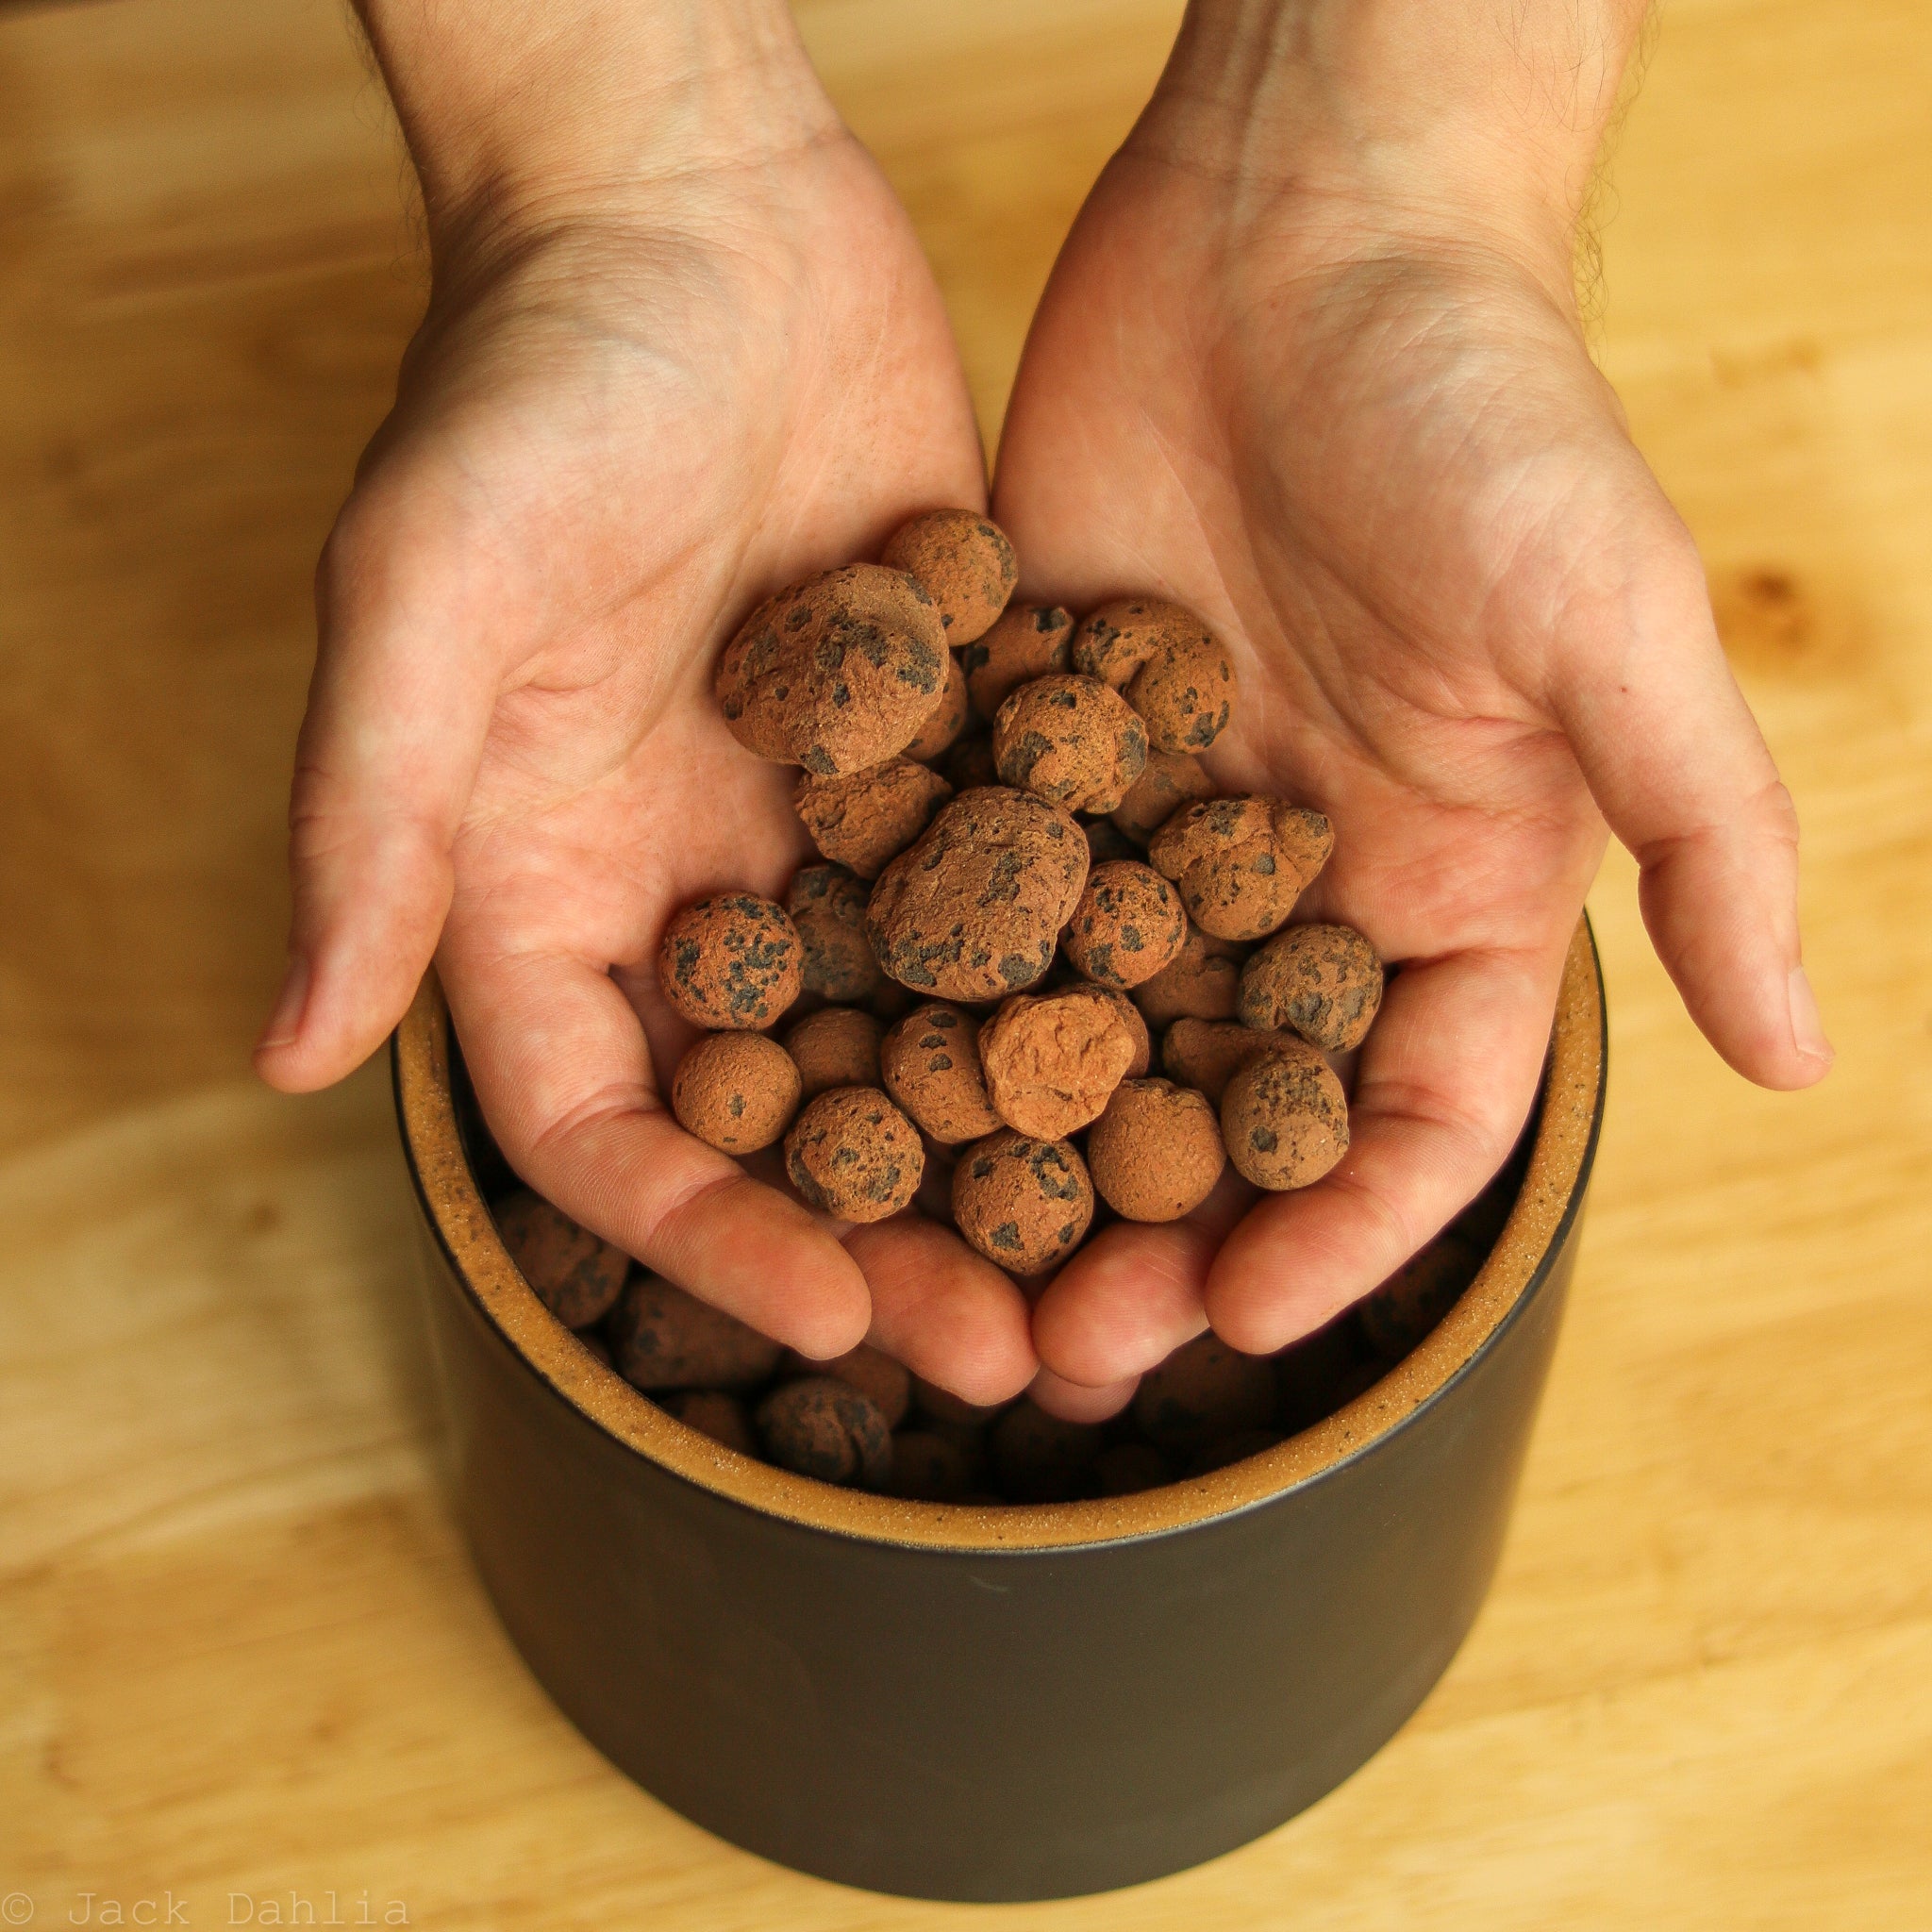 Stock Your Home 5Lbs LECA Balls Expanded Clay India